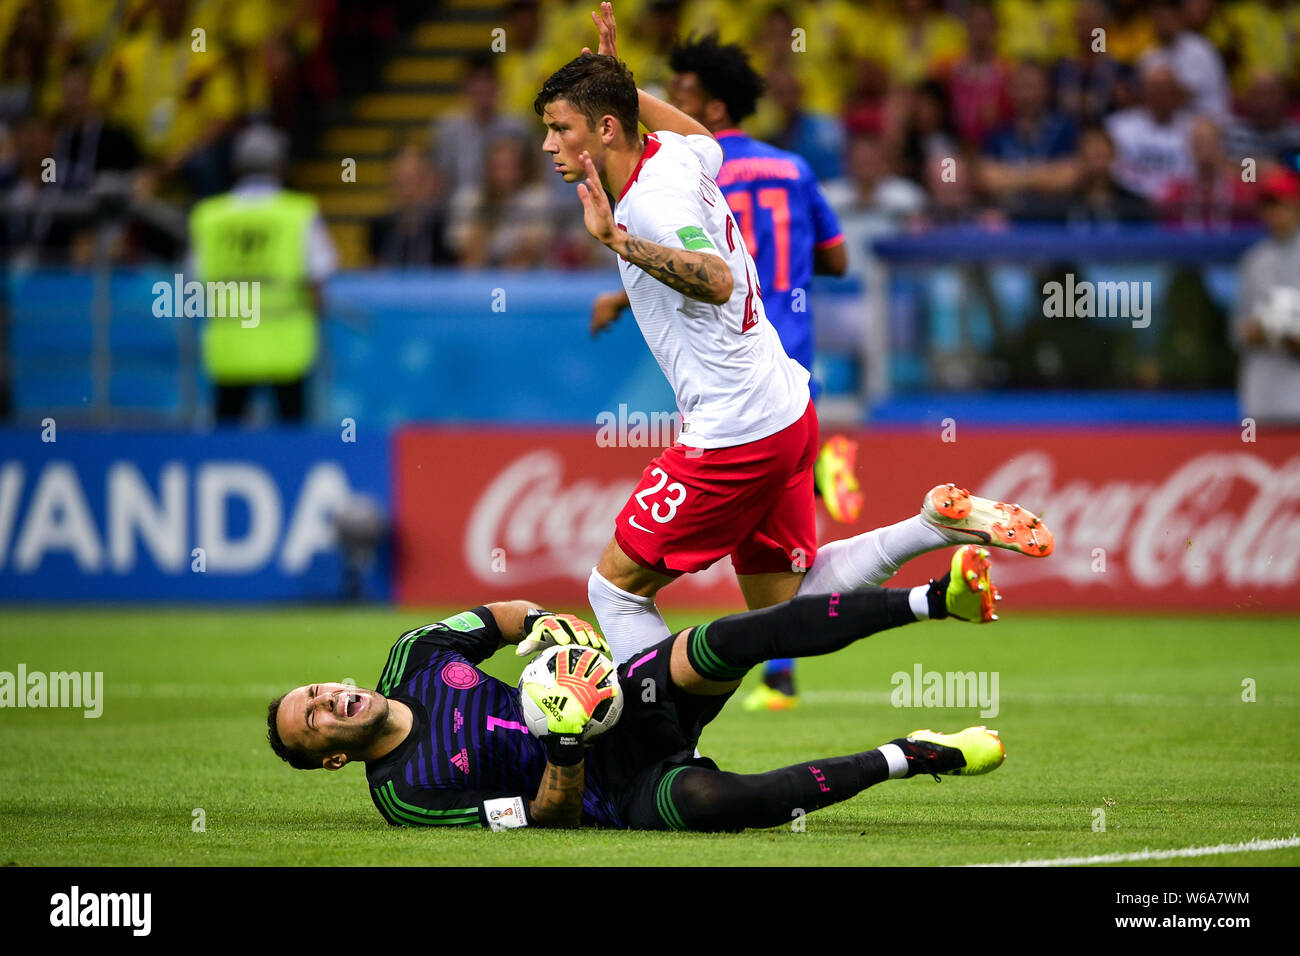 Goalkeeper David Ospina of Colombia, bottom, reacts after fouled by Dawid Kownacki of Poland in their Group H match during the FIFA World Cup 2018 in Stock Photo